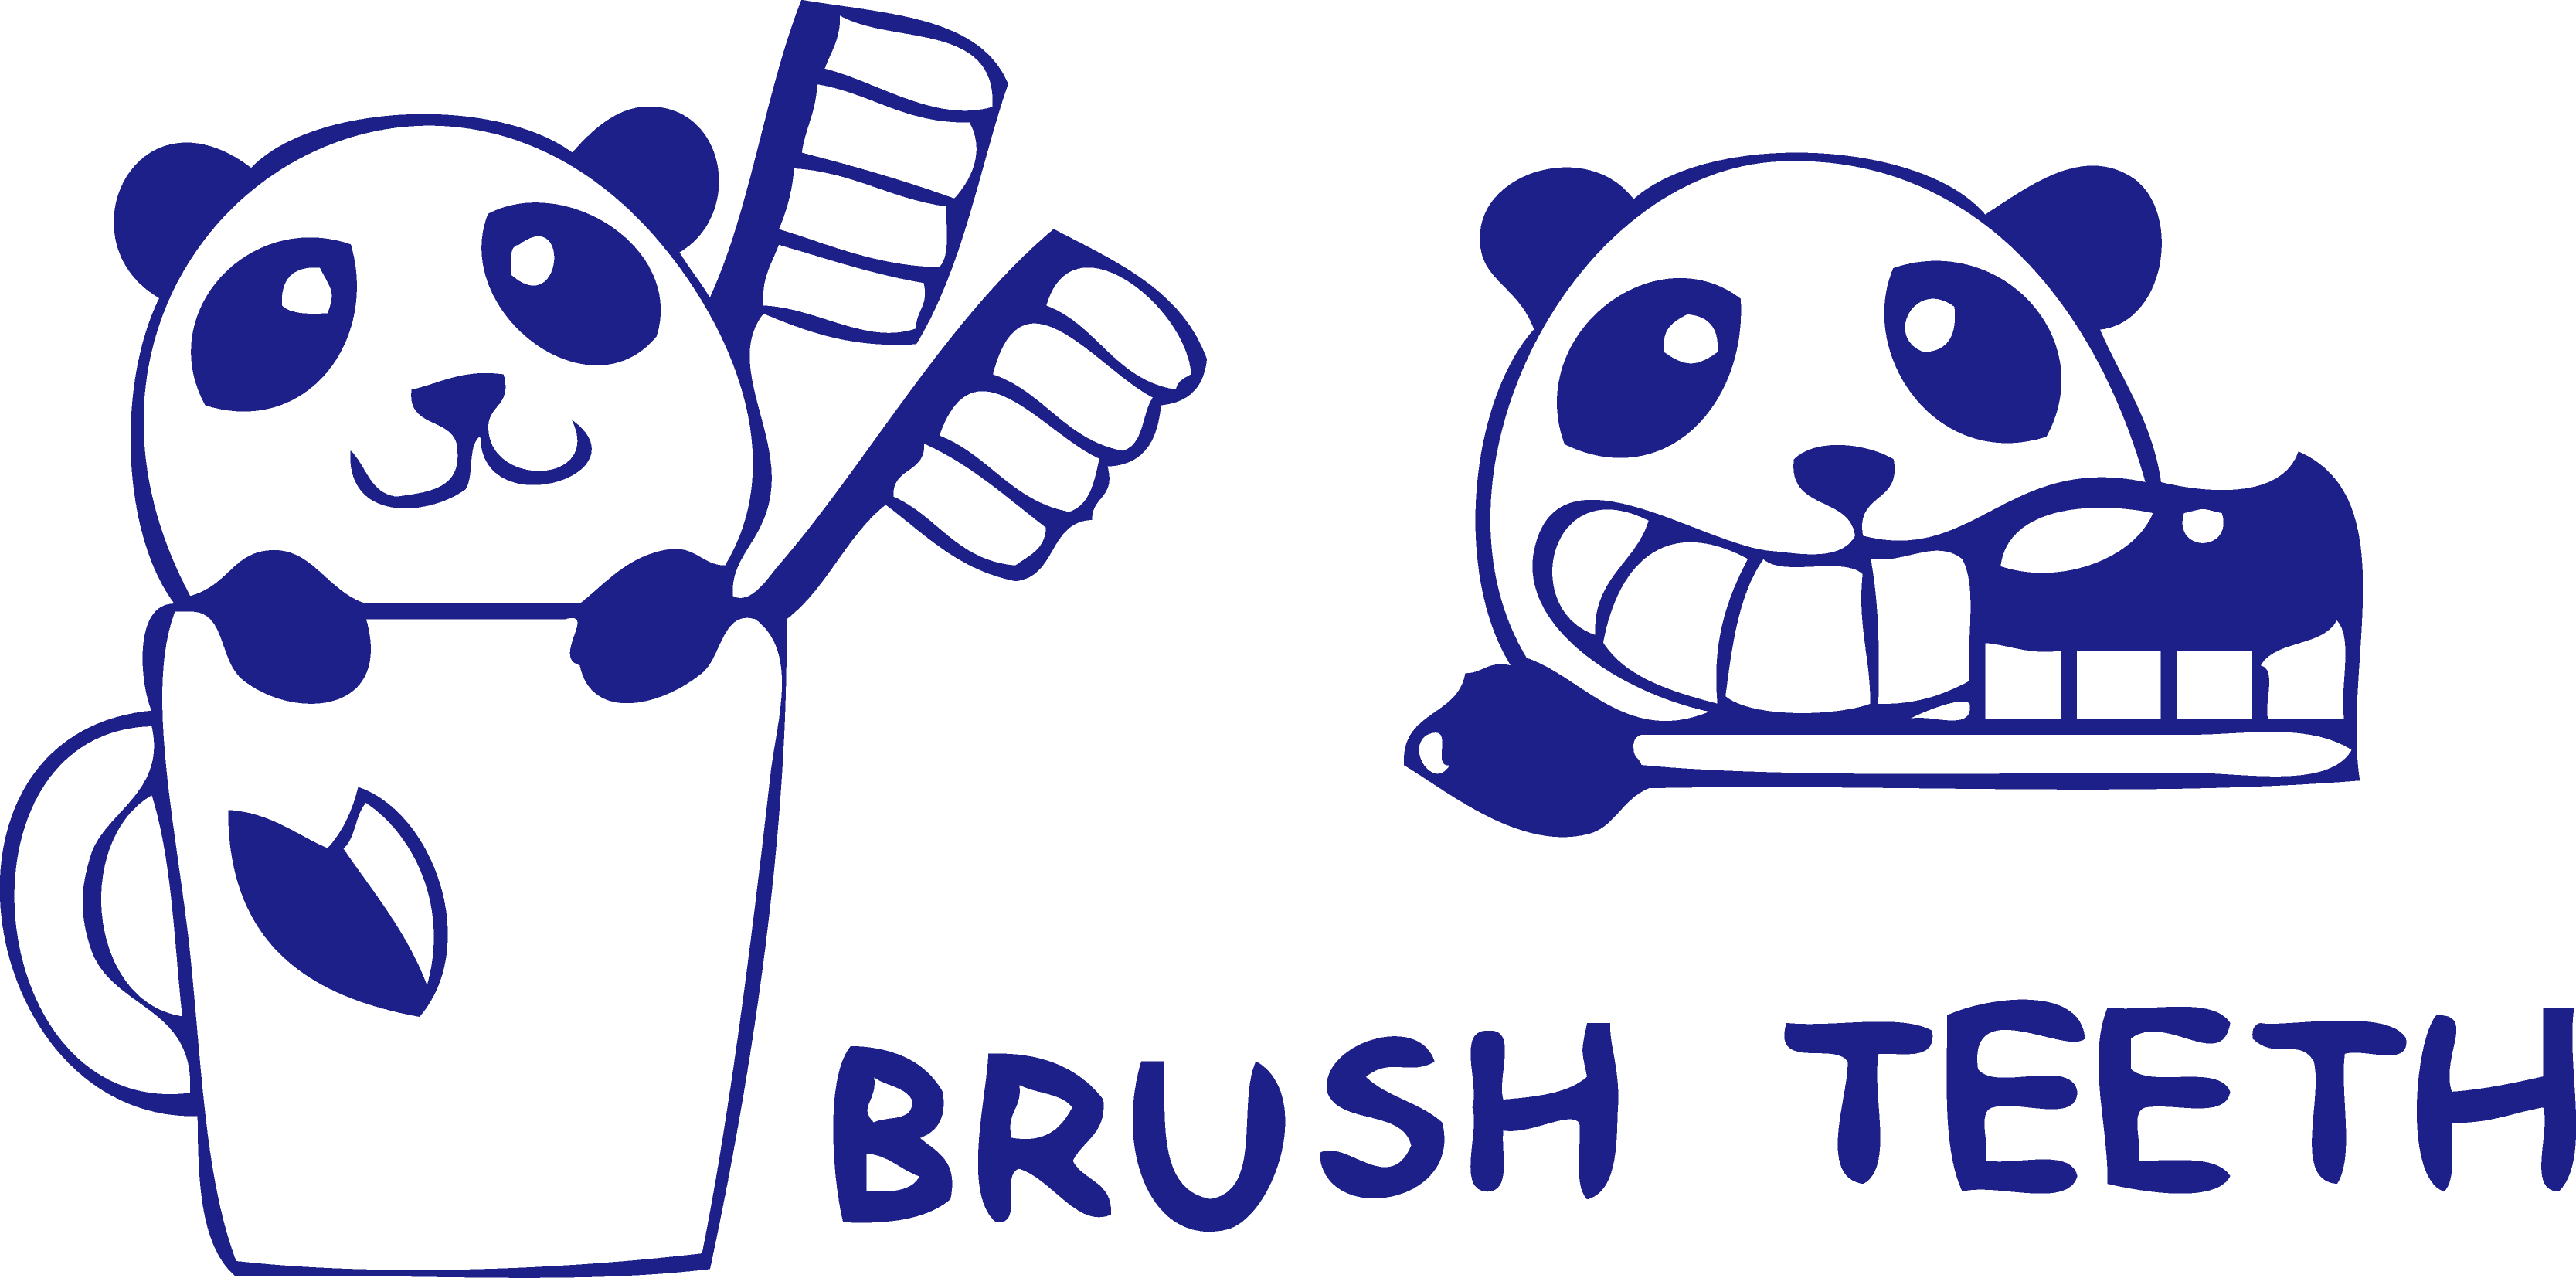 cup clipart toothbrush